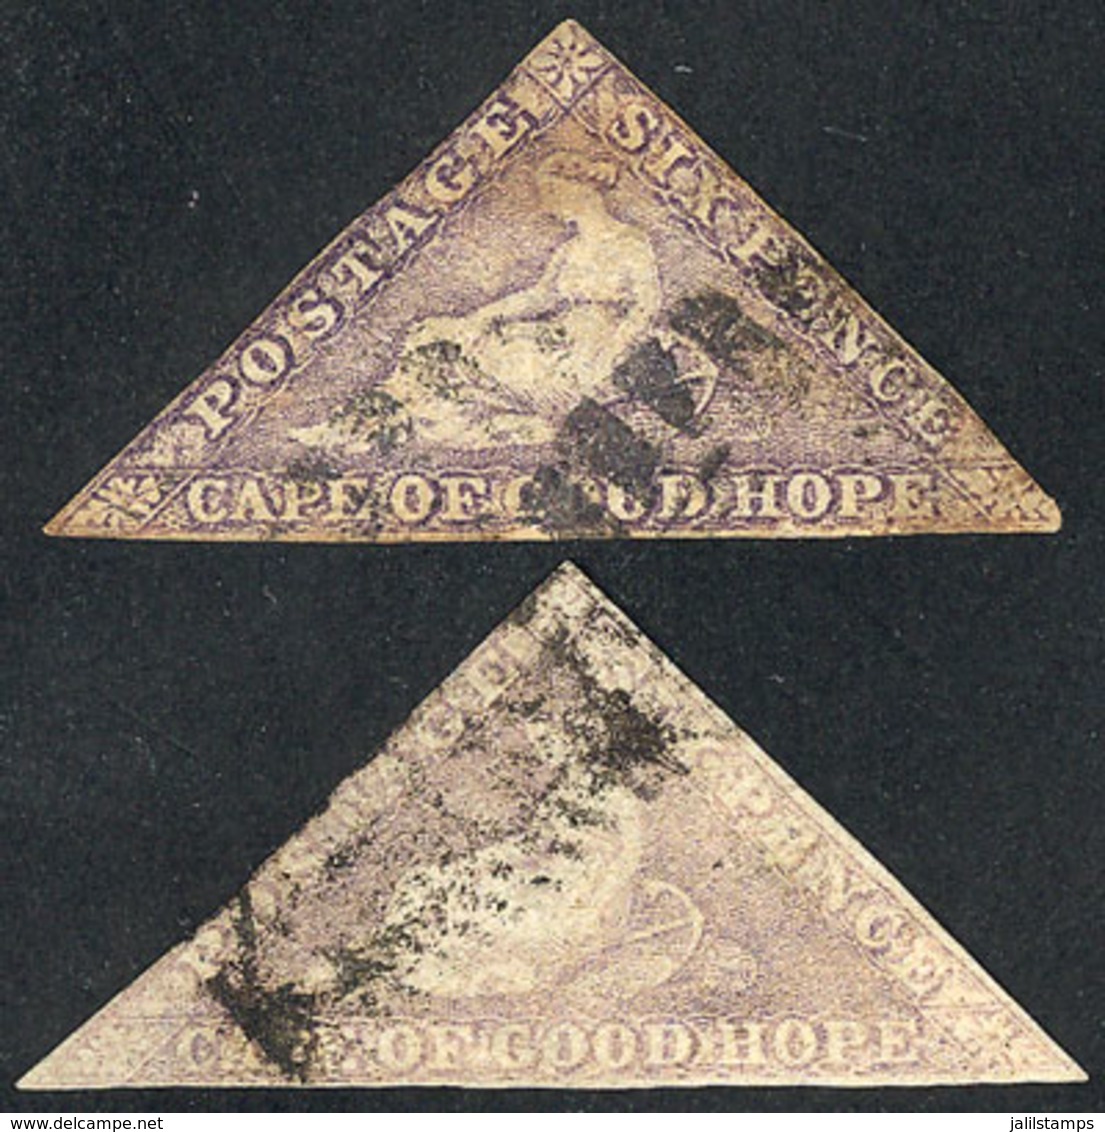 506 CAPE OF GOOD HOPE: 2 Classic Stamps Of 6p. Used, Fine To VF Quality, Scott Catalog V - Autres - Afrique